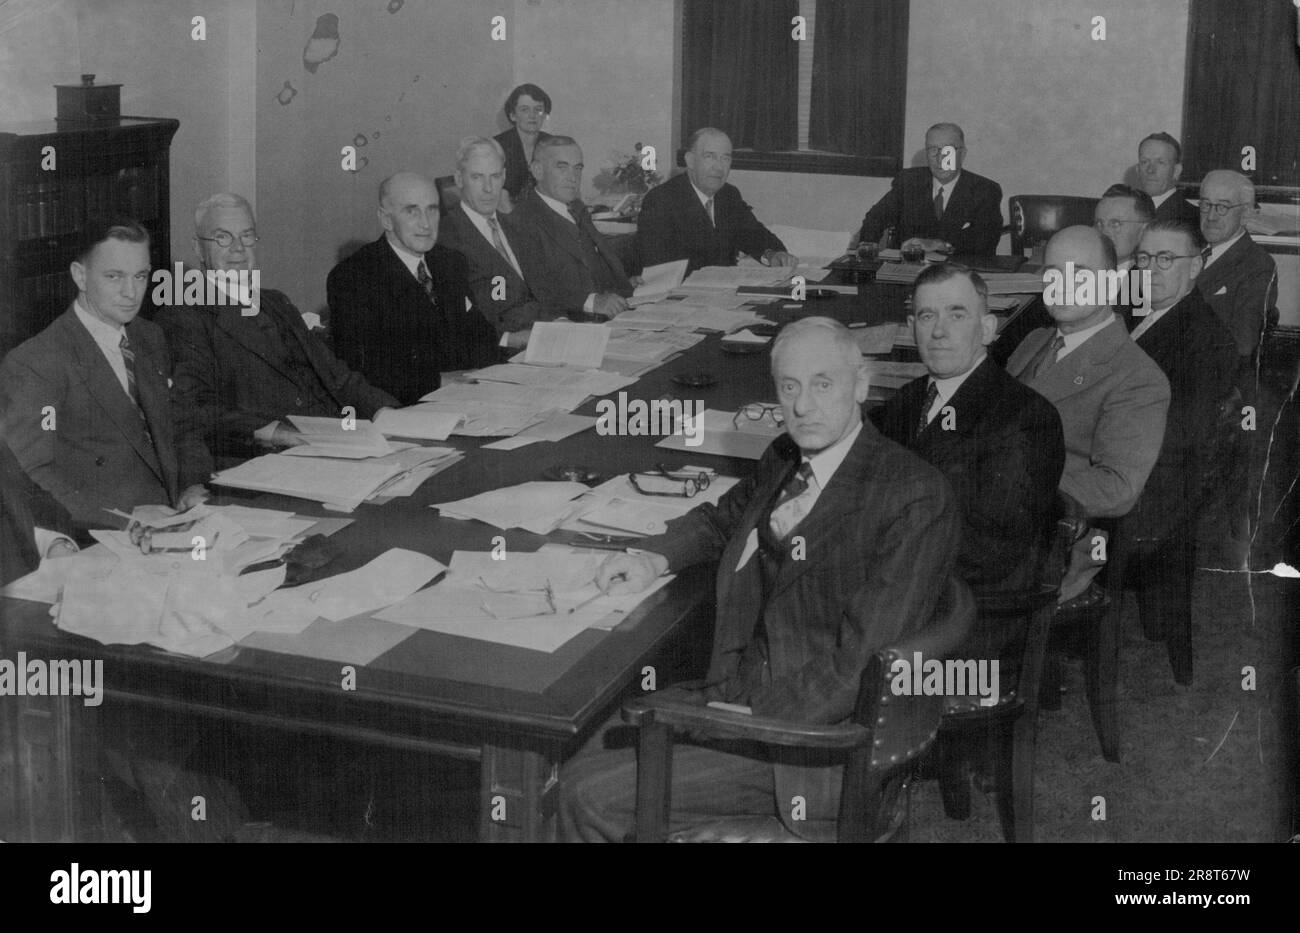 First Meeting. Conferring for the first time in Sydney are shown members of the Associated Stock Exchange. Round conference table from left: W. S. Holder and C. Bowly (Brisbane); H. C. Collingwood, W. I. Potter, G. D. Brown and R. A. Rowe (Melbourne); F. E. Tilley. chairman (Sydney); A. G. Wallace, H. Maxwell, and K. J. Polkinghorne (Sydney); L. H. Laidlaw and R. B. Brindal (Adelaide); R. A. Chandler and W. C. Burrows (Hobart). April 18, 1951. Stock Photo